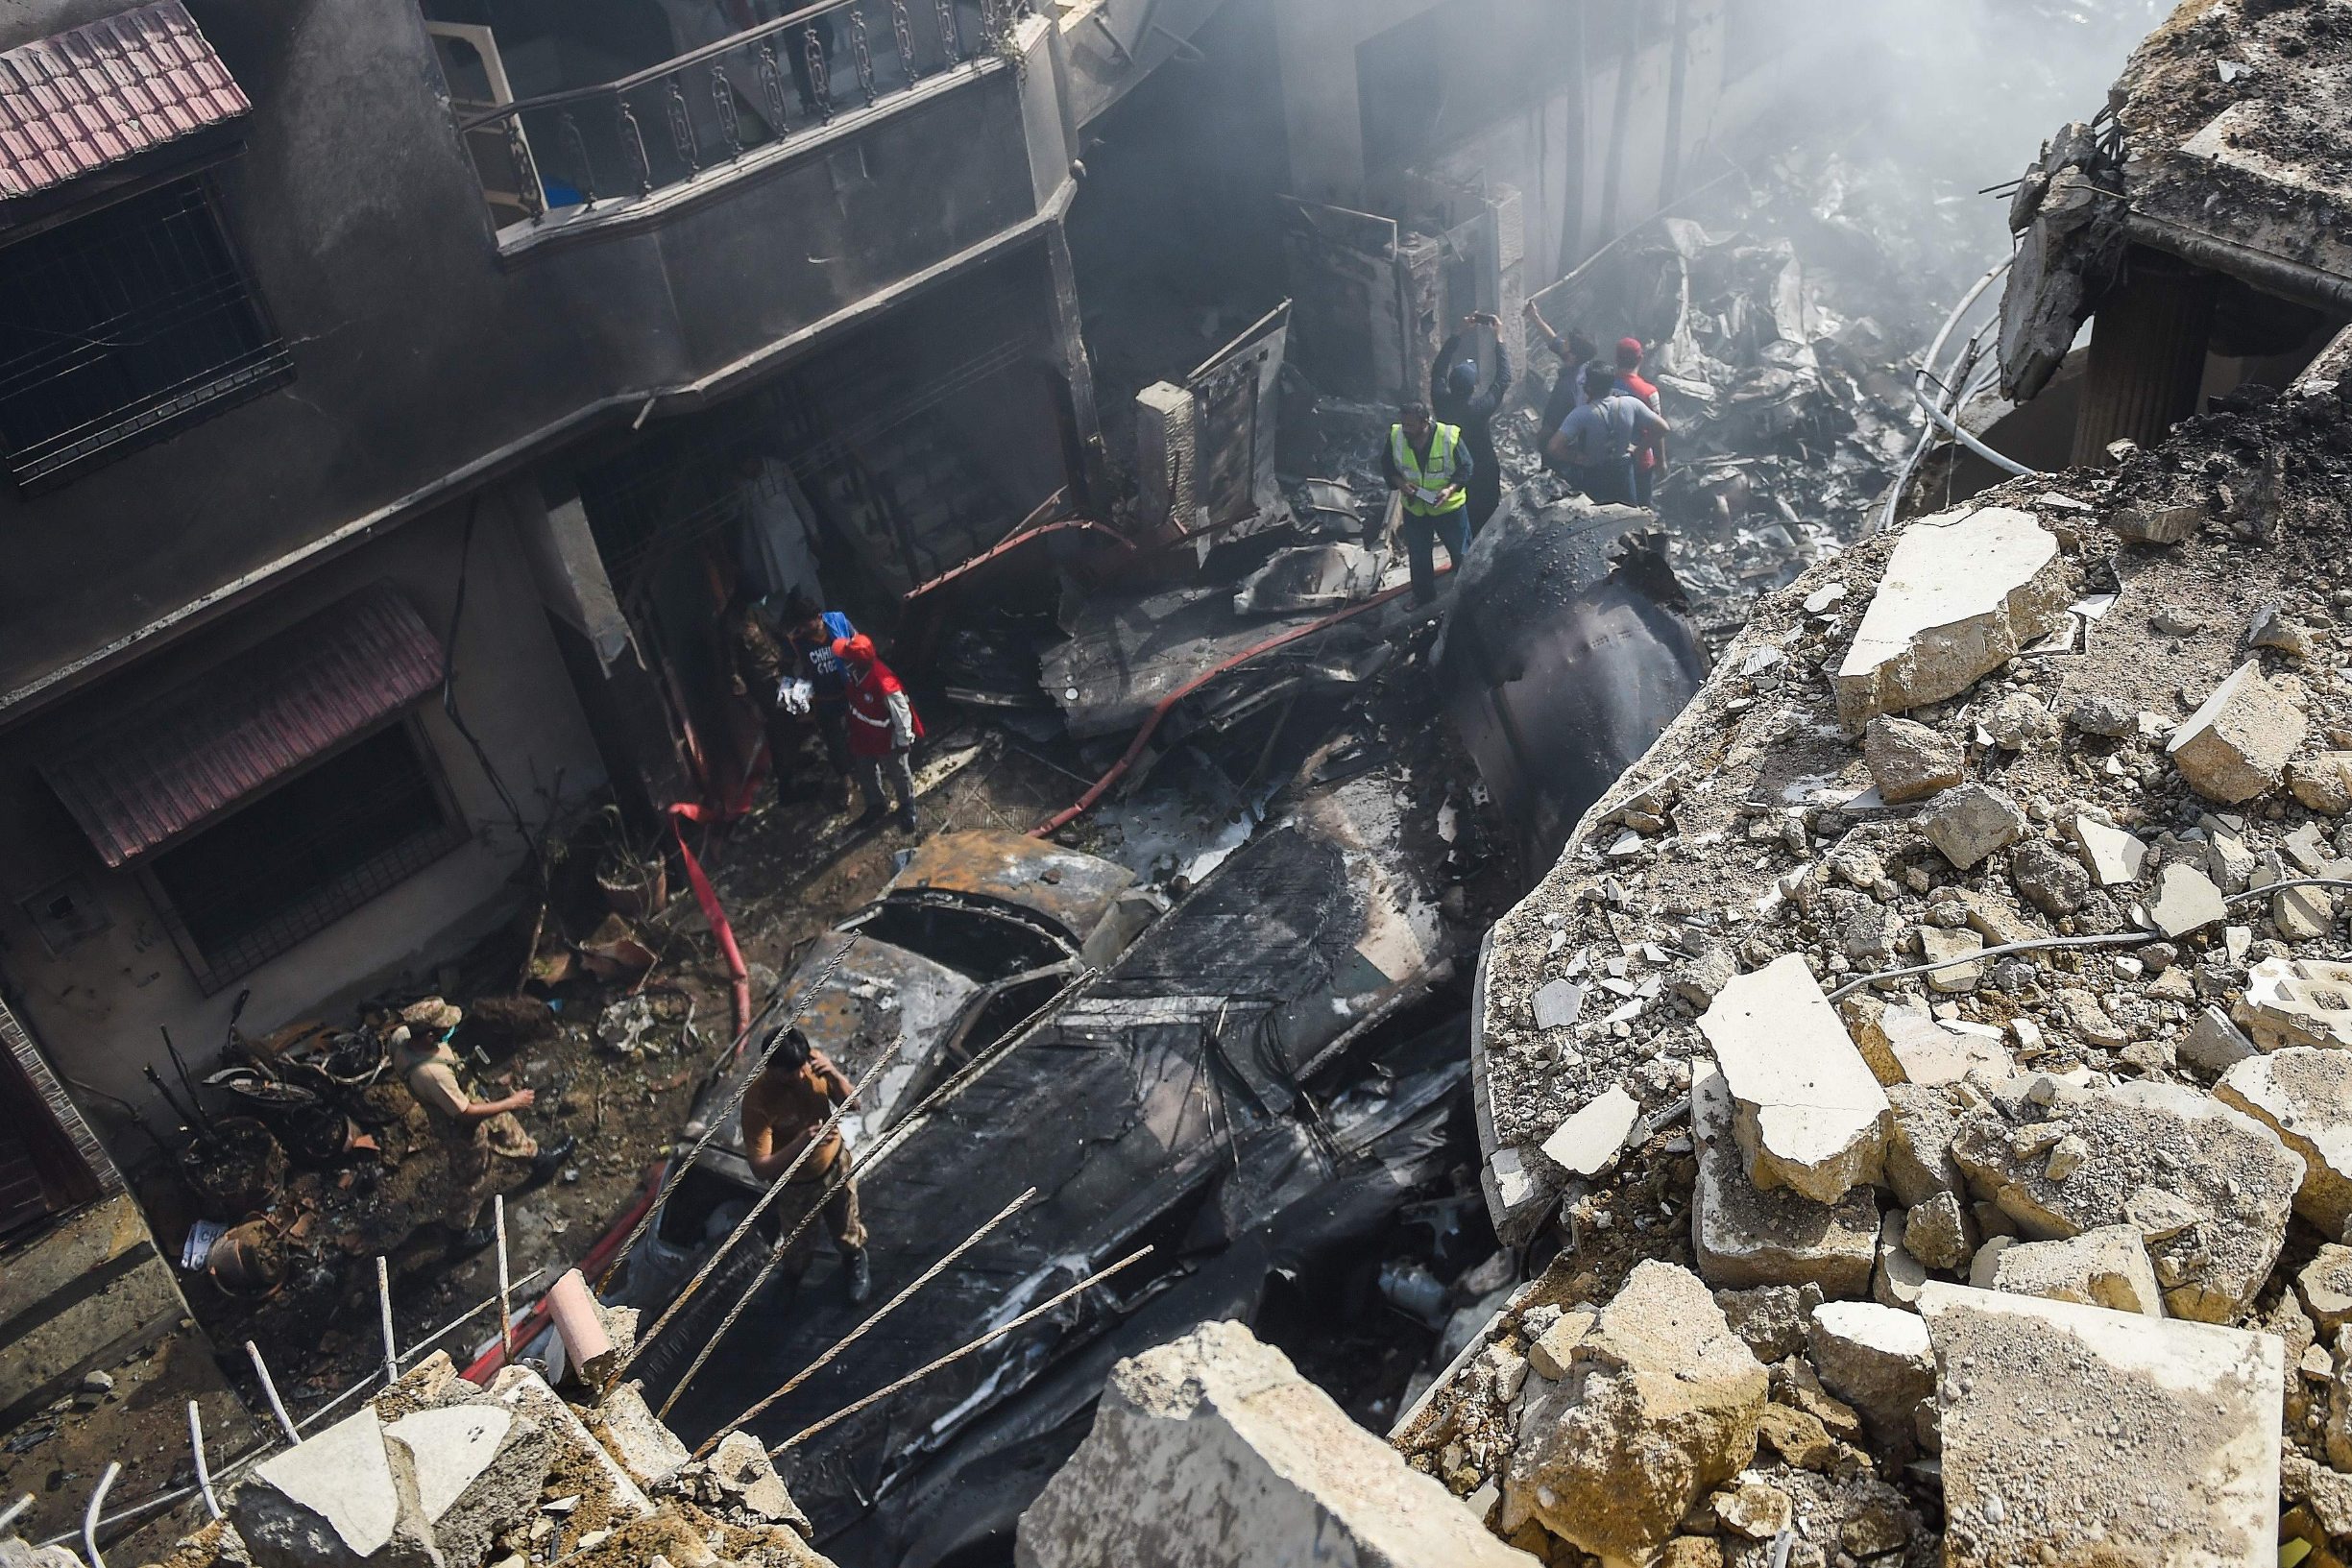 Rescue workers gather at the site after a Pakistan International Airlines aircraft crashed in a residential area in Karachi on May 22, 2020. - A Pakistani plane with nearly 100 people on board crashed into a residential area in the southern city of Karachi on May 22, killing several people on the ground. (Photo by Rizwan TABASSUM / AFP)